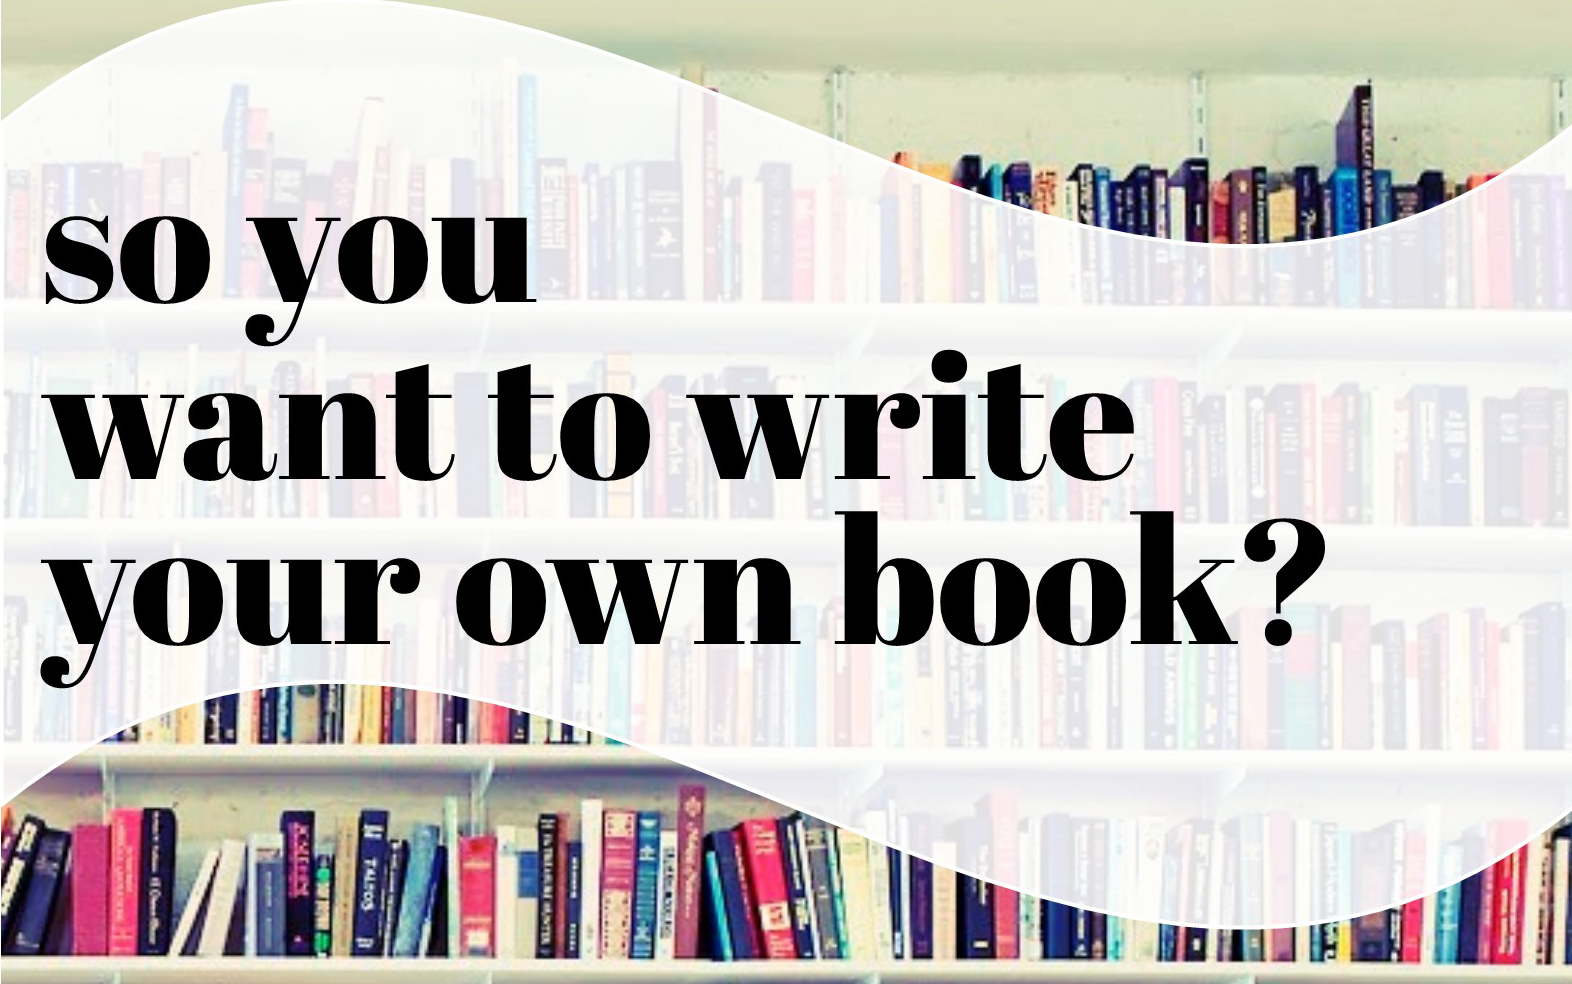 So You Want to Write Your Own Book - Lancaster Public Library